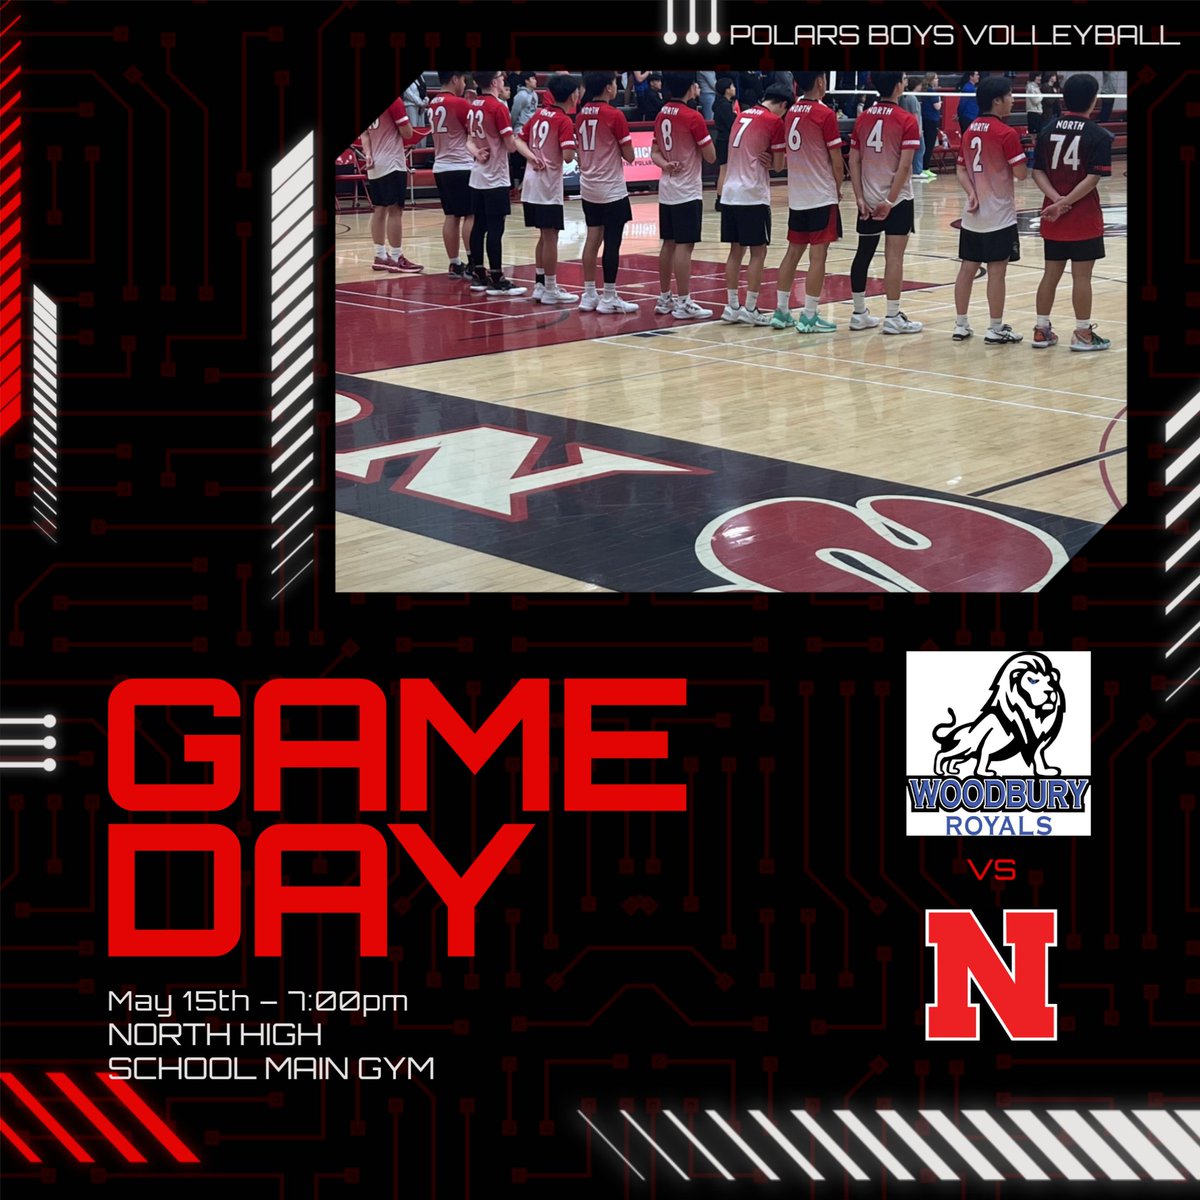 Polar Nation!!!! It is a busy day at North High School today!!! Please come out and Support your Polar Boys Volleyball team as they host Woodbury High School tonight! Game times are 6:00PM (JV) and 7:00pm (Varsity)!! 
#GOPOLARS